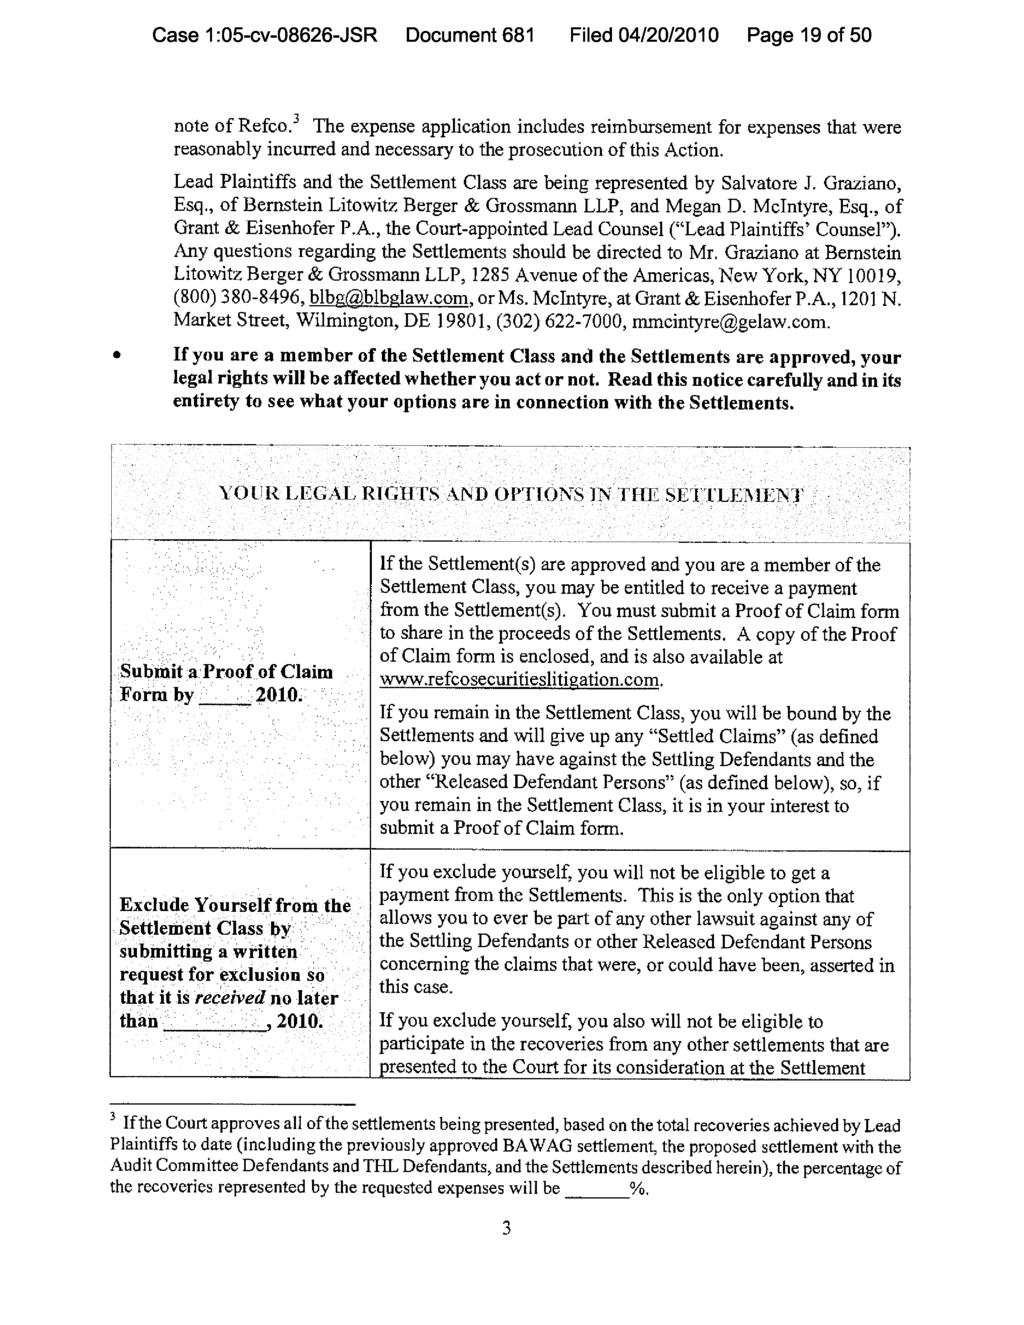 Case 1:05-cv-08626-JSR Document 681 Filed 04/20/2010 Page 19 of 50 note of Refco.